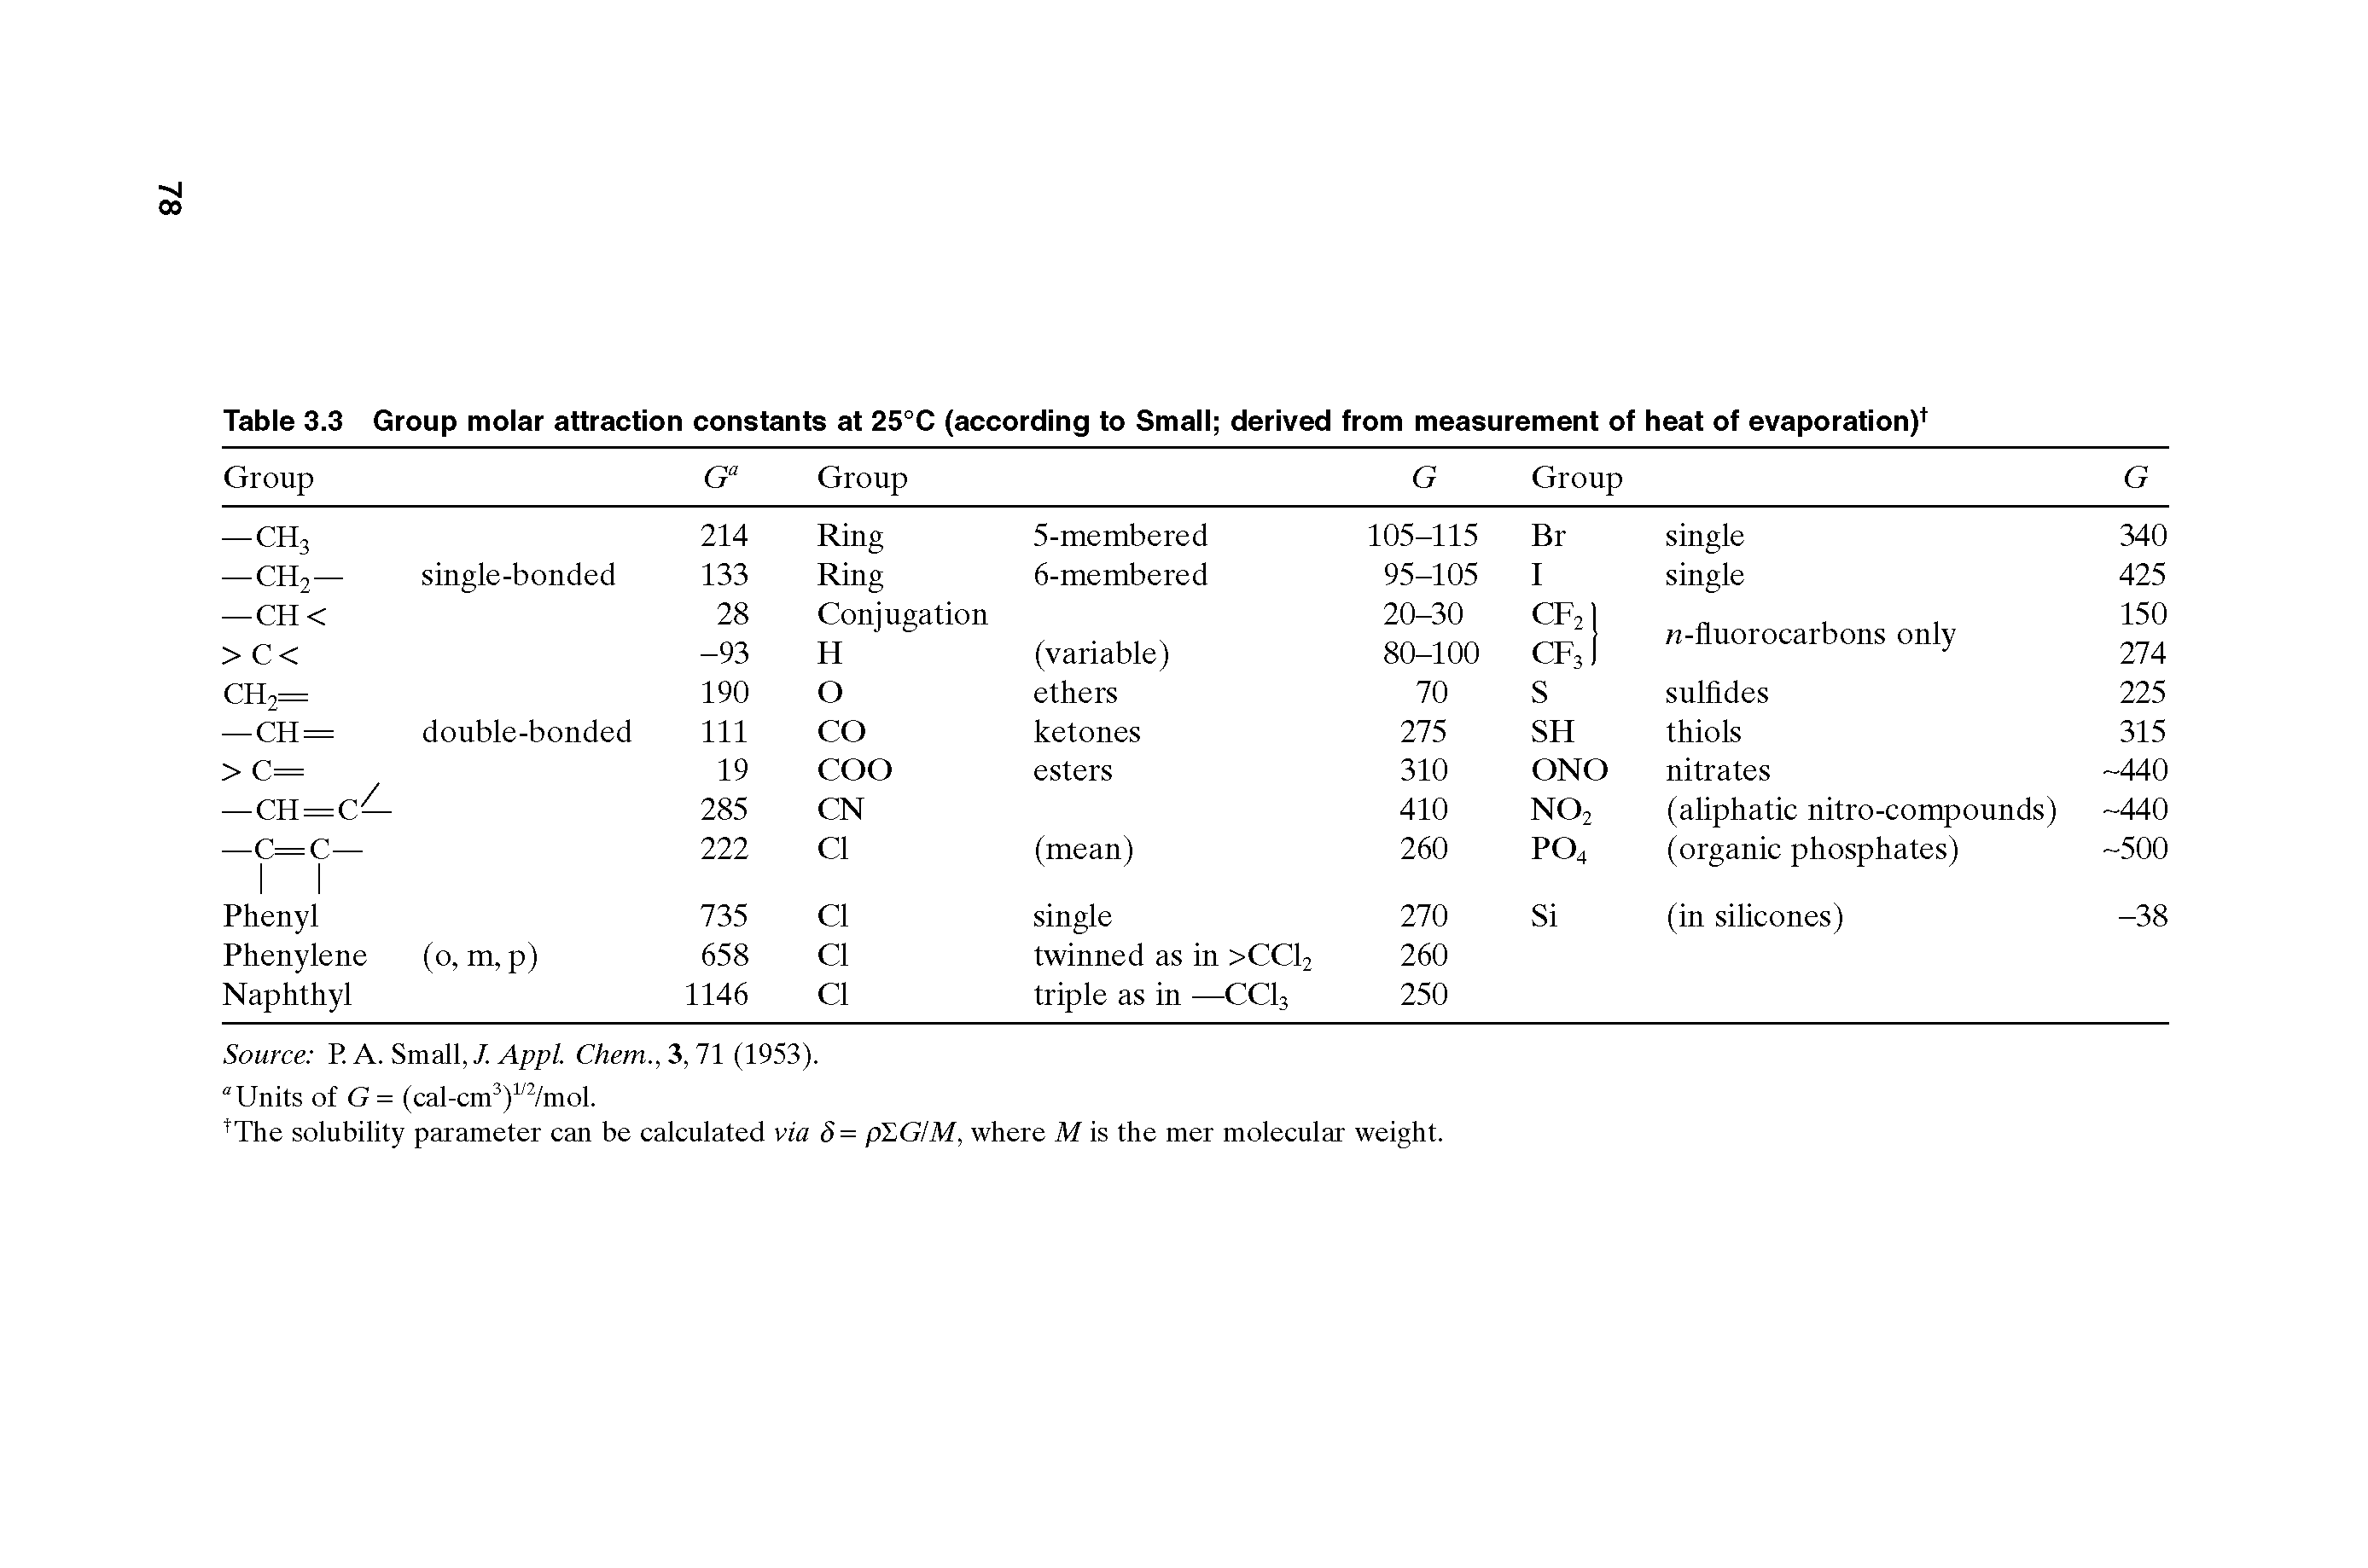 Table 3.3 Group molar attraction constants at 25°C (according to Small derived from measurement of heat of evaporation) ...